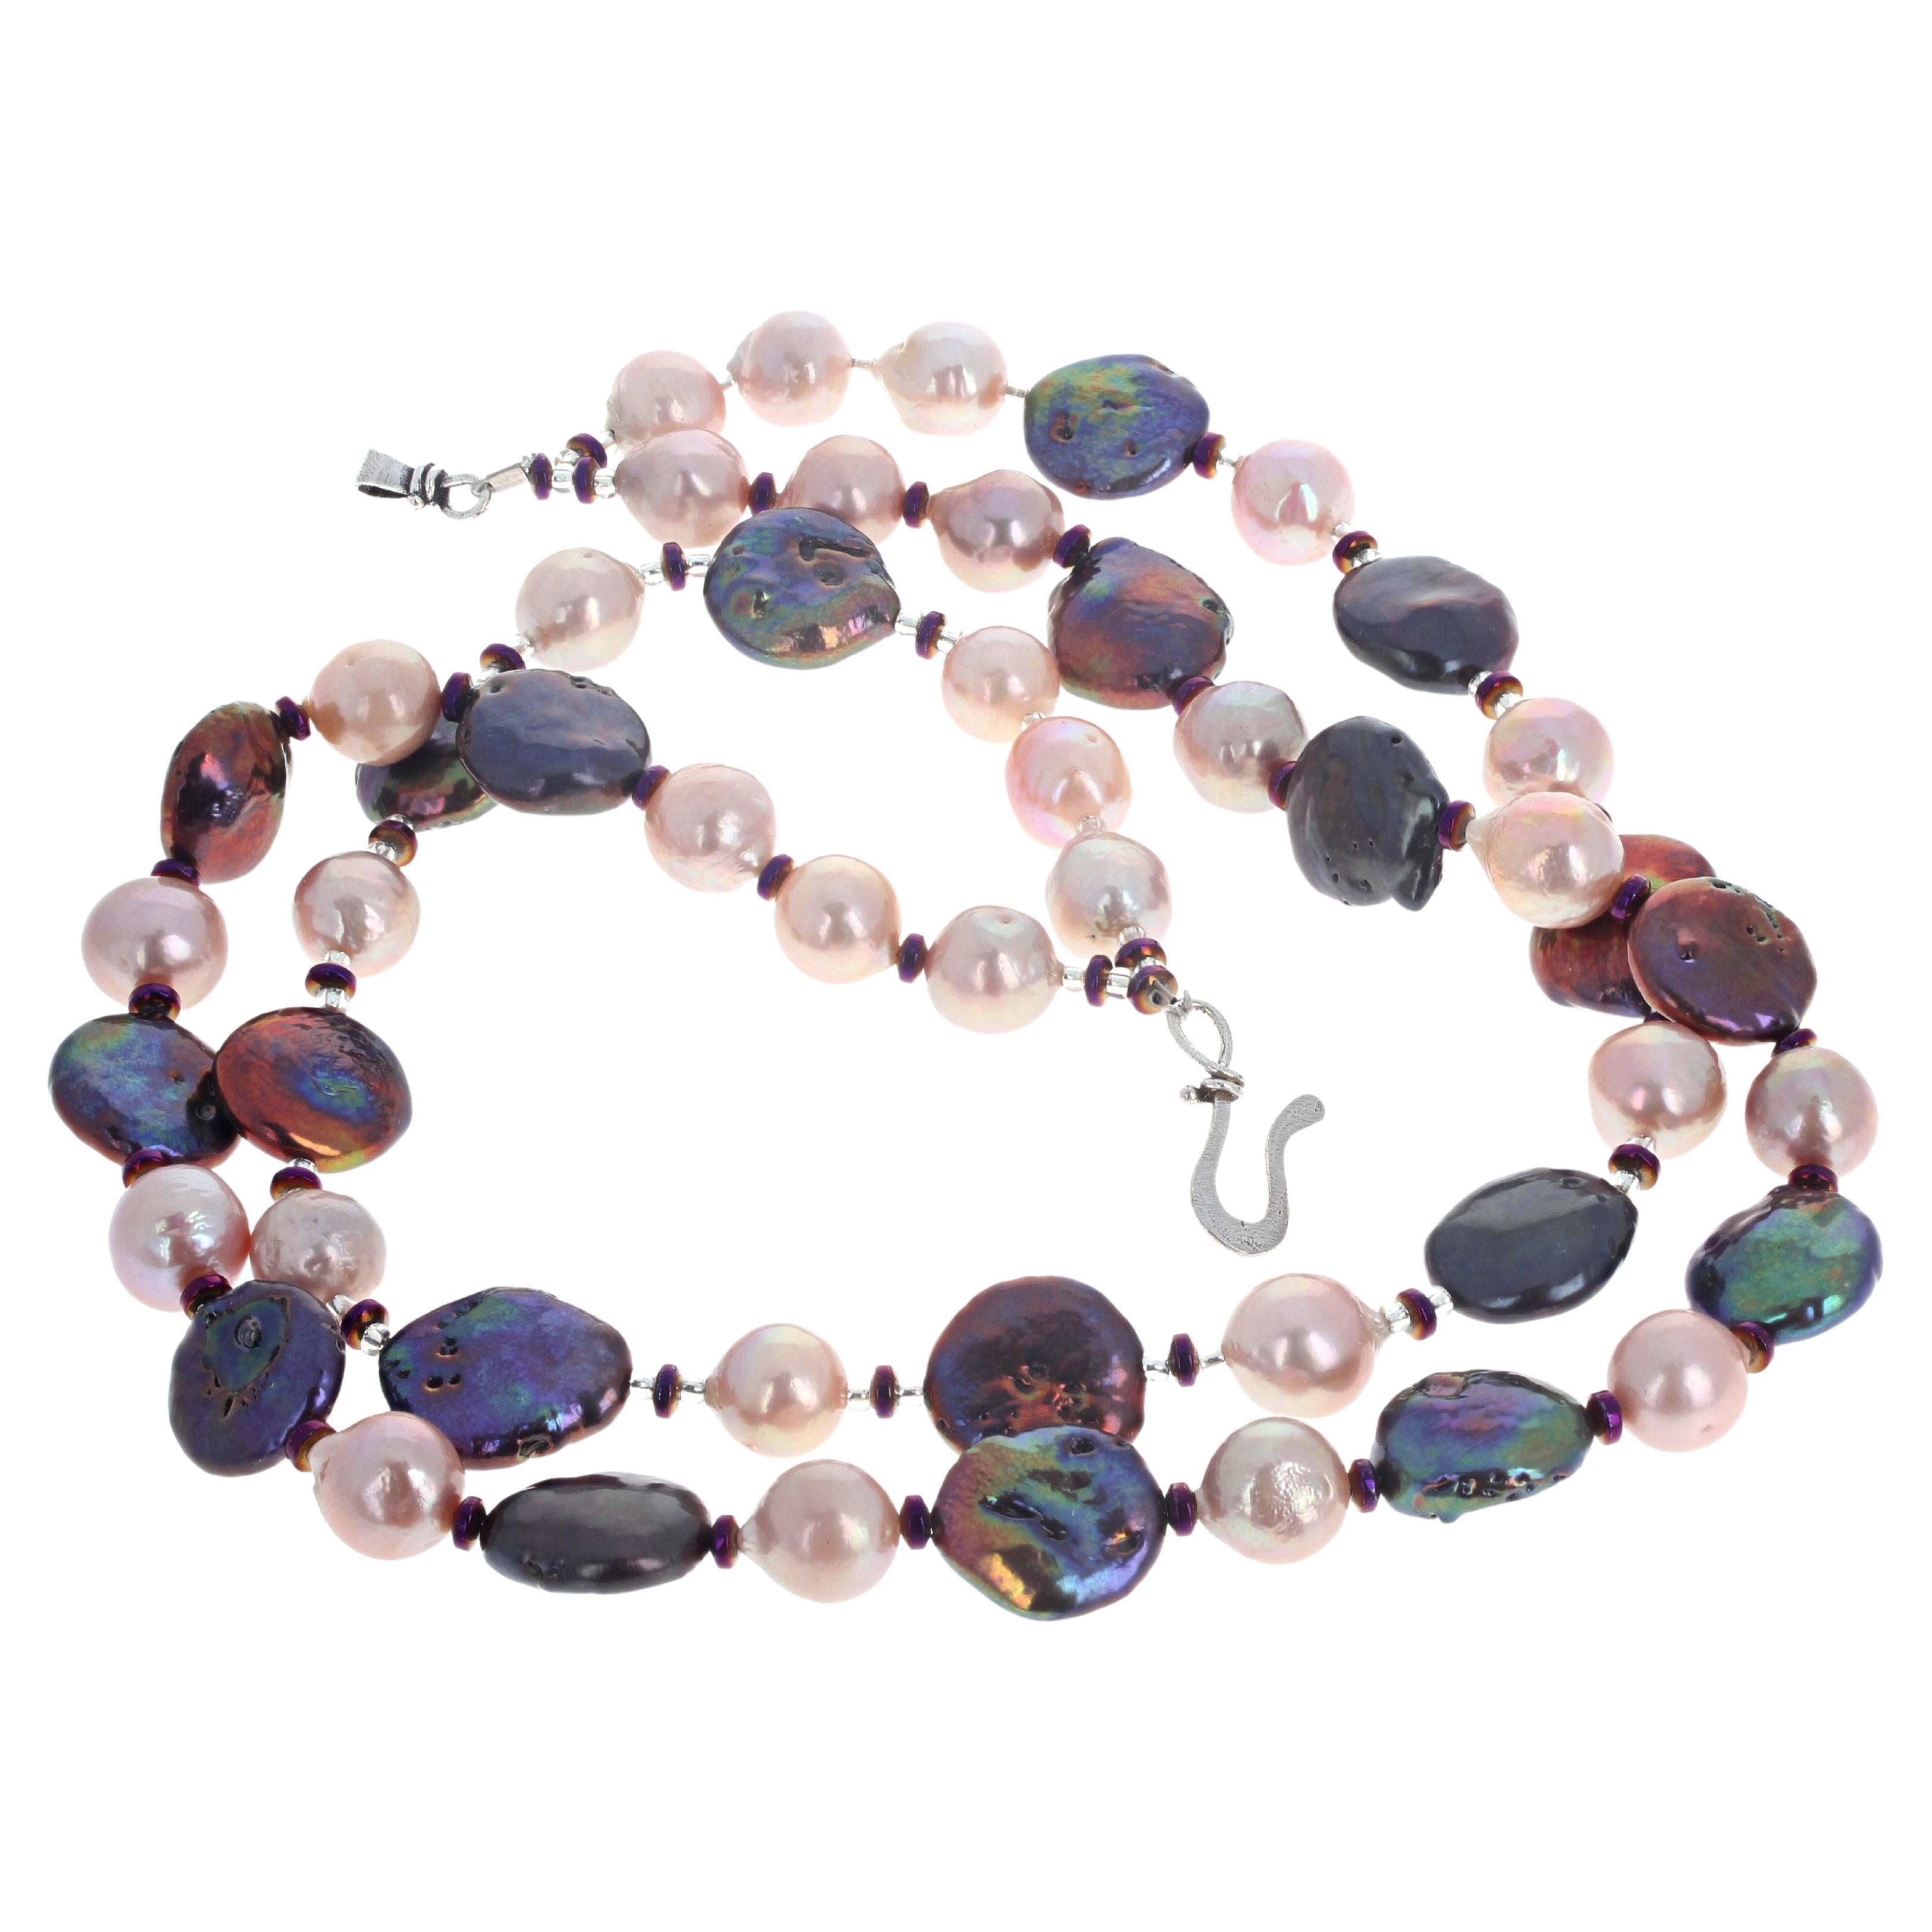 Fascinating double strand of light pinkish cultured real Pearls (approximately 10mm) enhance these fascinating real cultured Keshi Pearls (approximately 16mm) enhanced also by the teeny tiny little real purple Amethysts.  This 19 inch long necklace